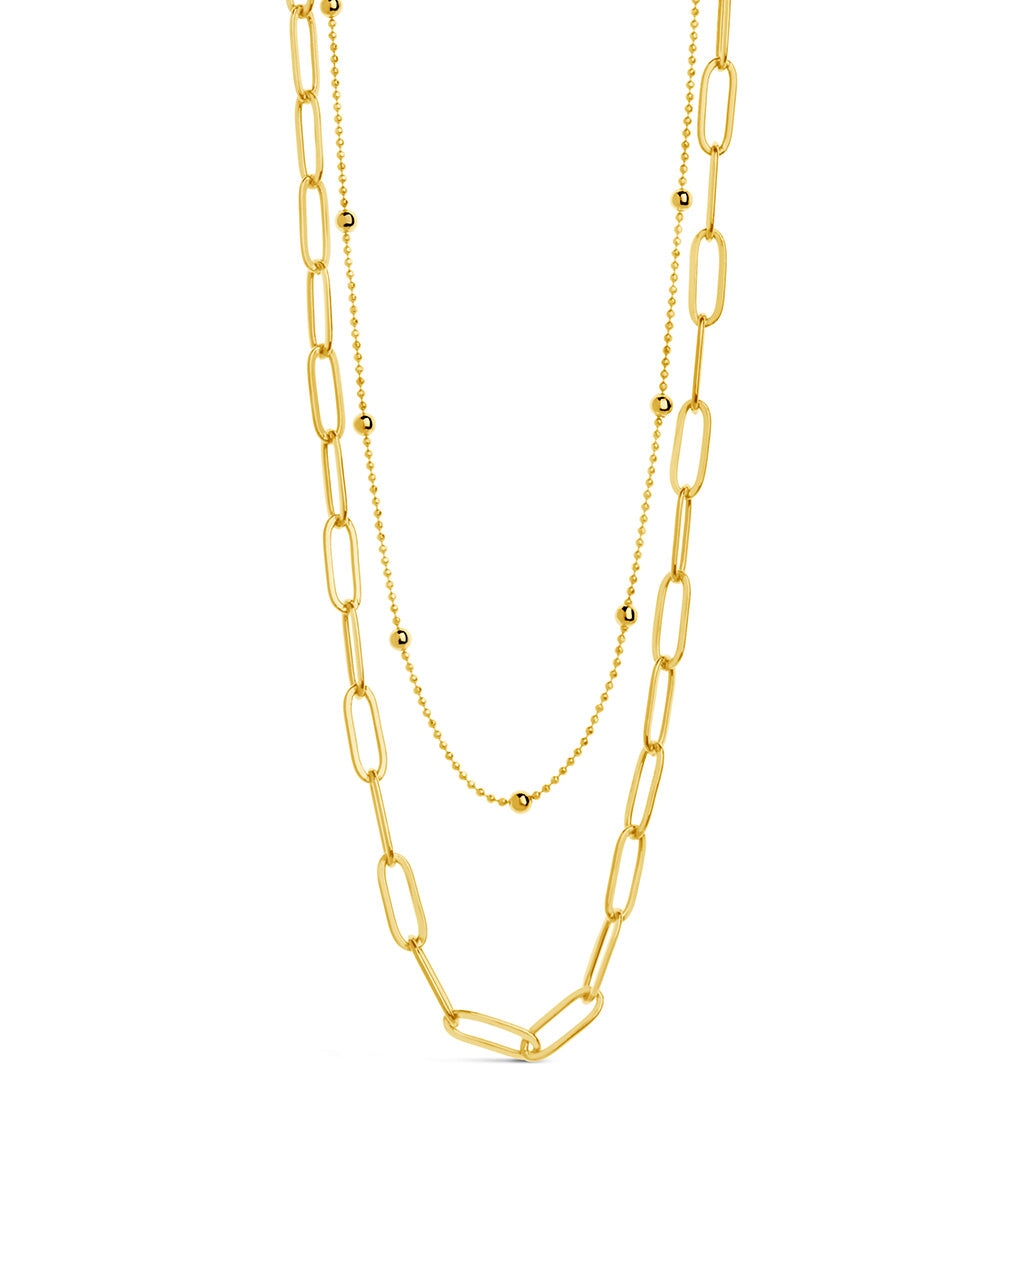 Leah Layered Chain Necklace Necklace Sterling Forever 